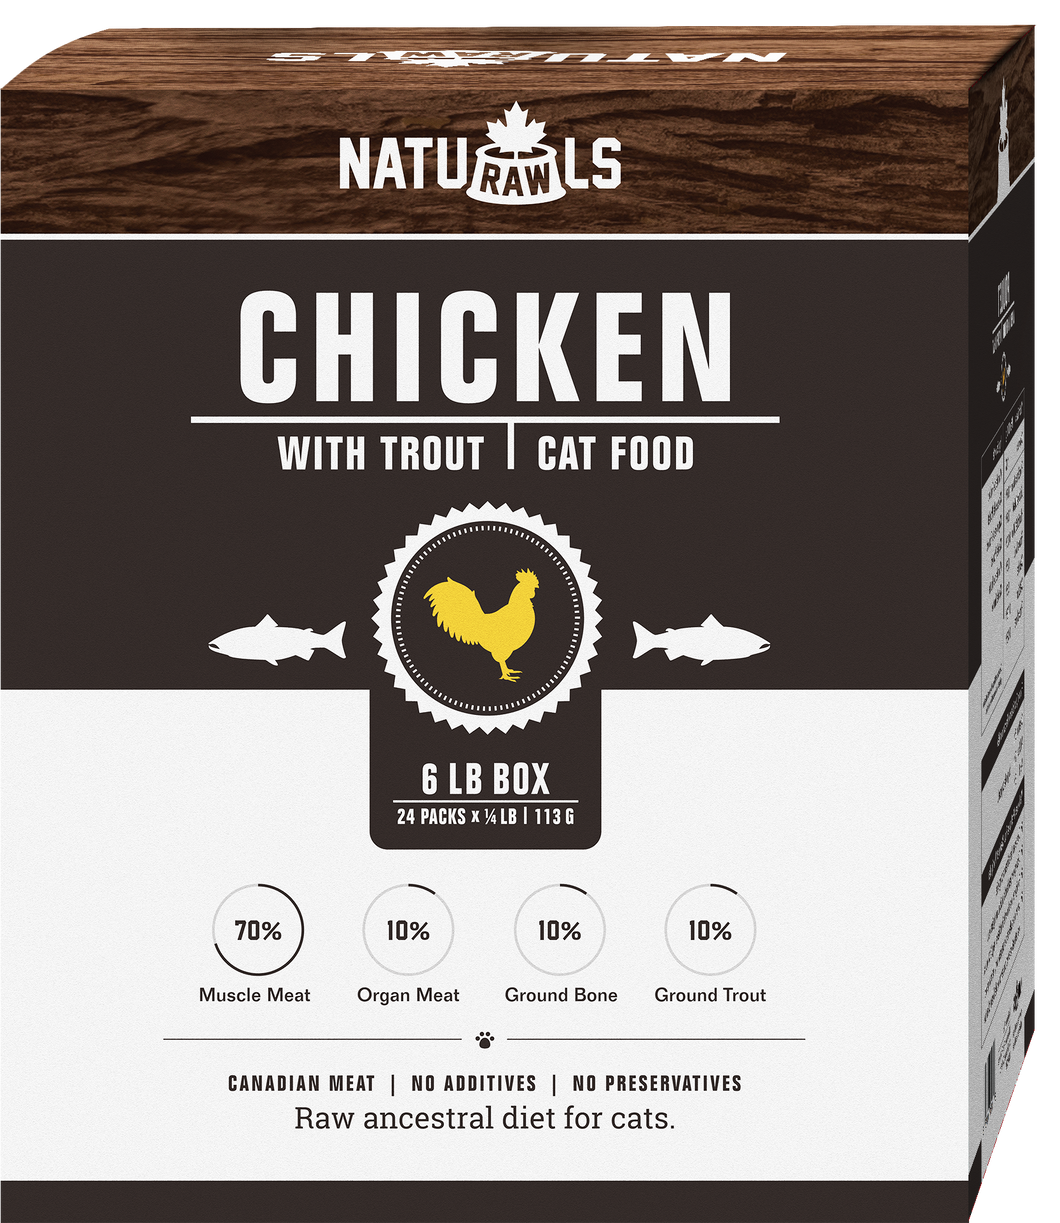 NATURAWLS - CHICKEN WITH TROUT CAT FOOD